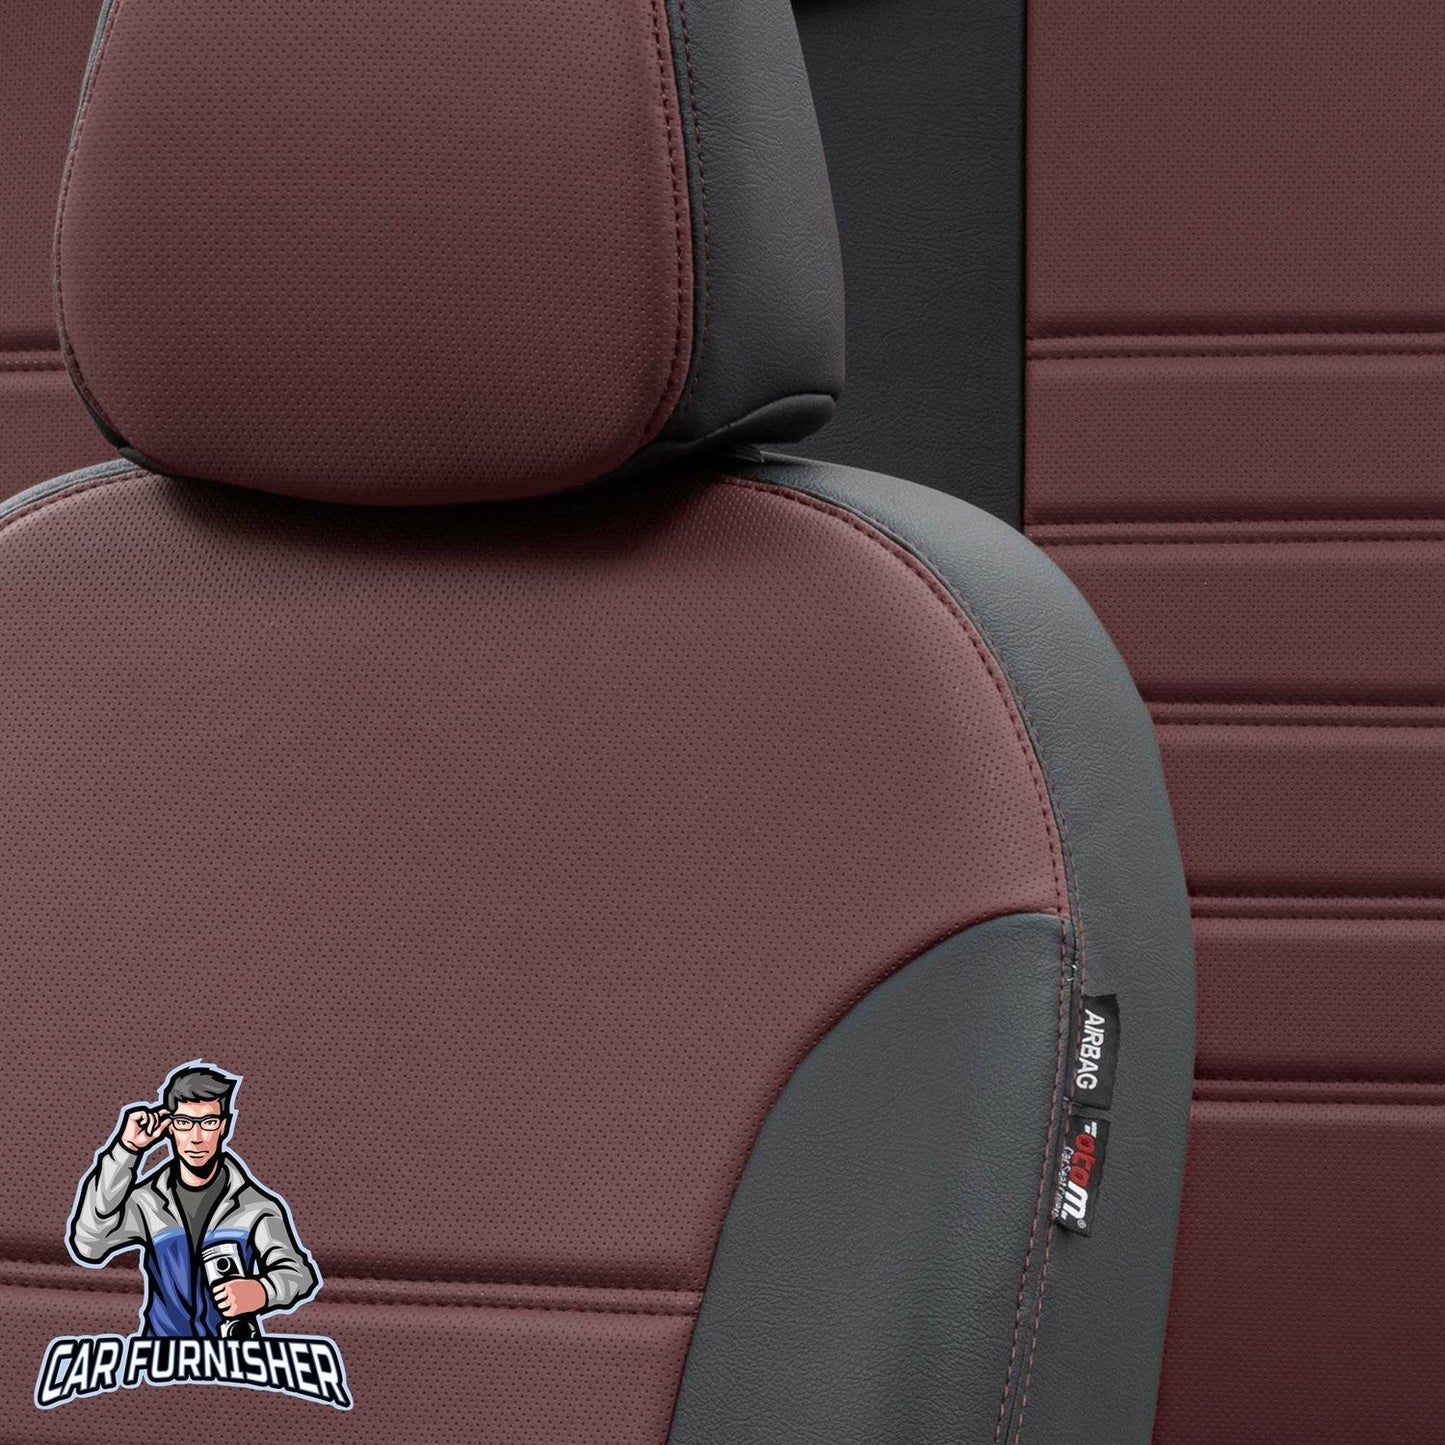 Fiat Marea Seat Covers Istanbul Leather Design Burgundy Leather